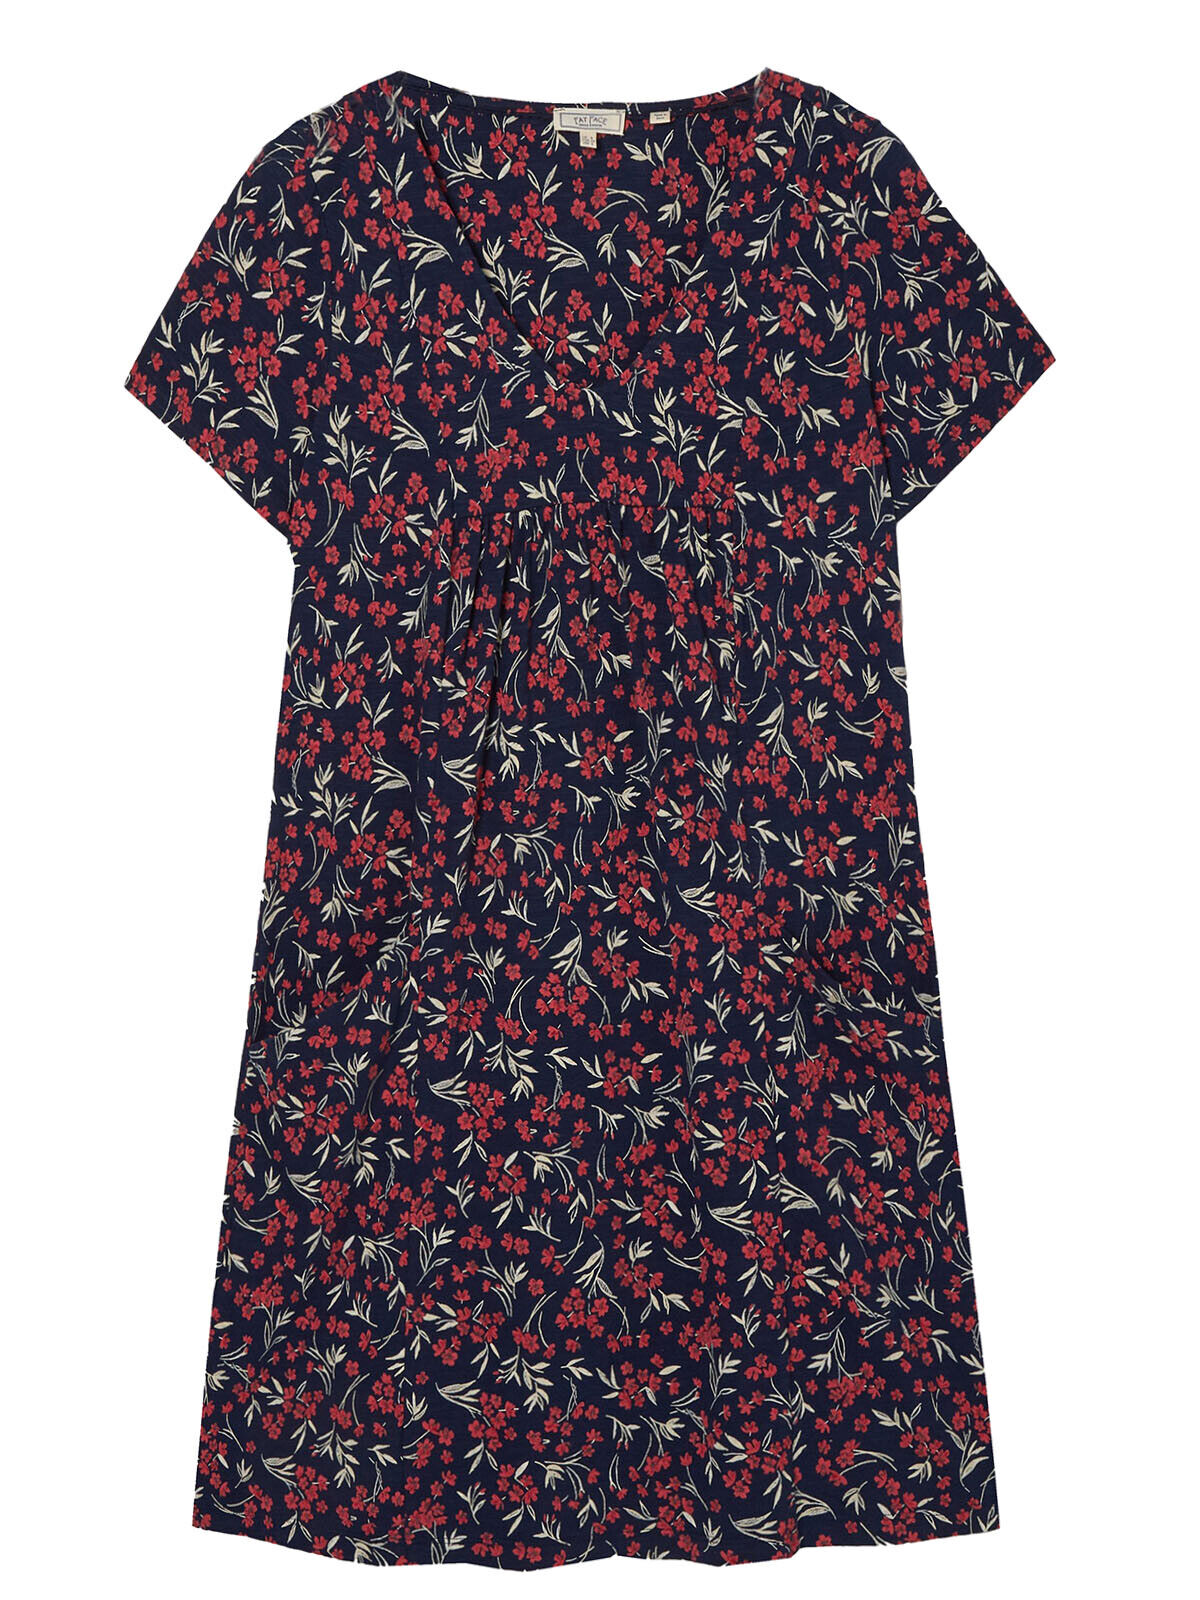 EX Fat Face Navy Mariana Floral Jersey Dress in Sizes 12, 14, 18 RRP £46